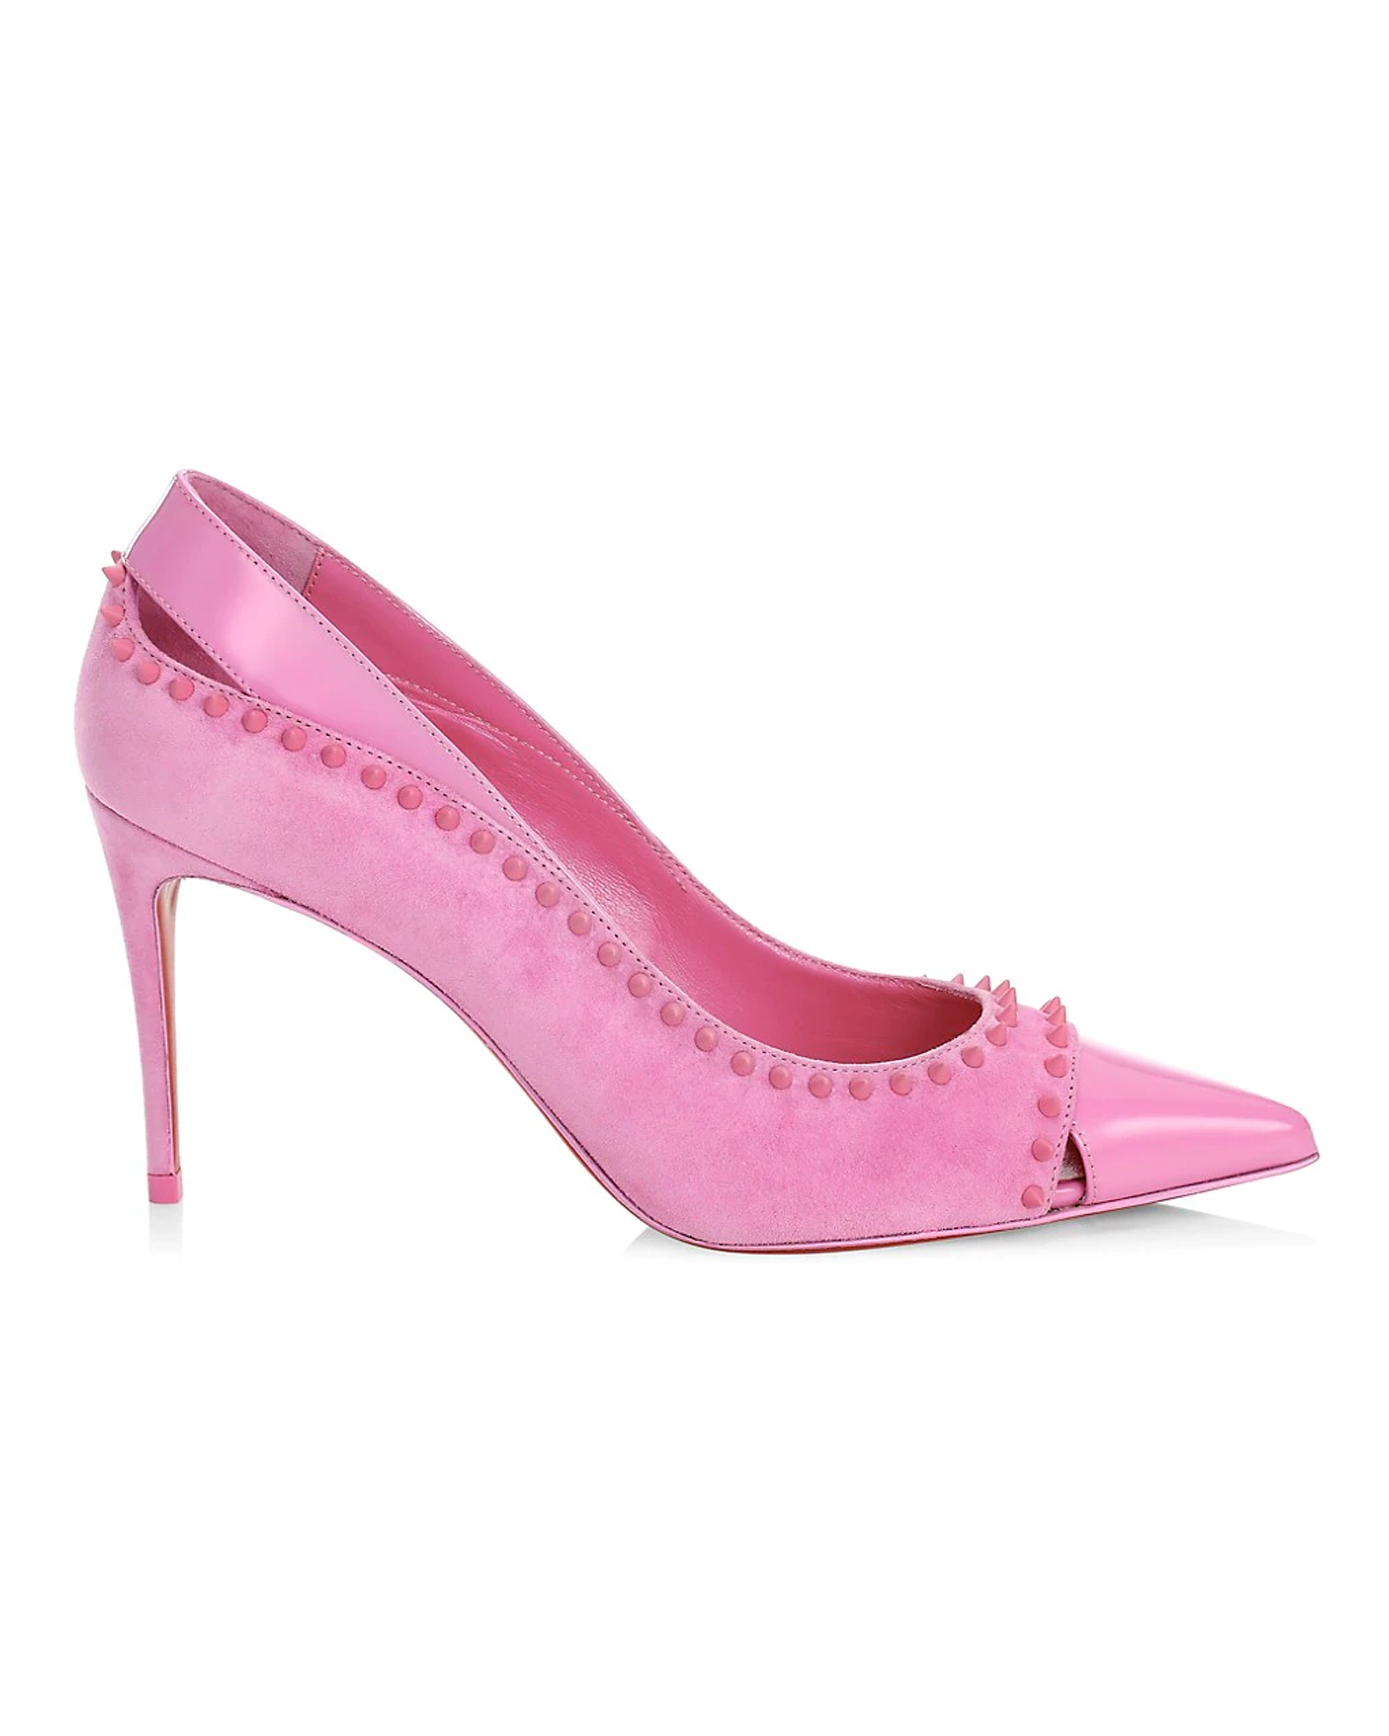 Duvette Spike 85 Patent and Suede Pump in Gummy